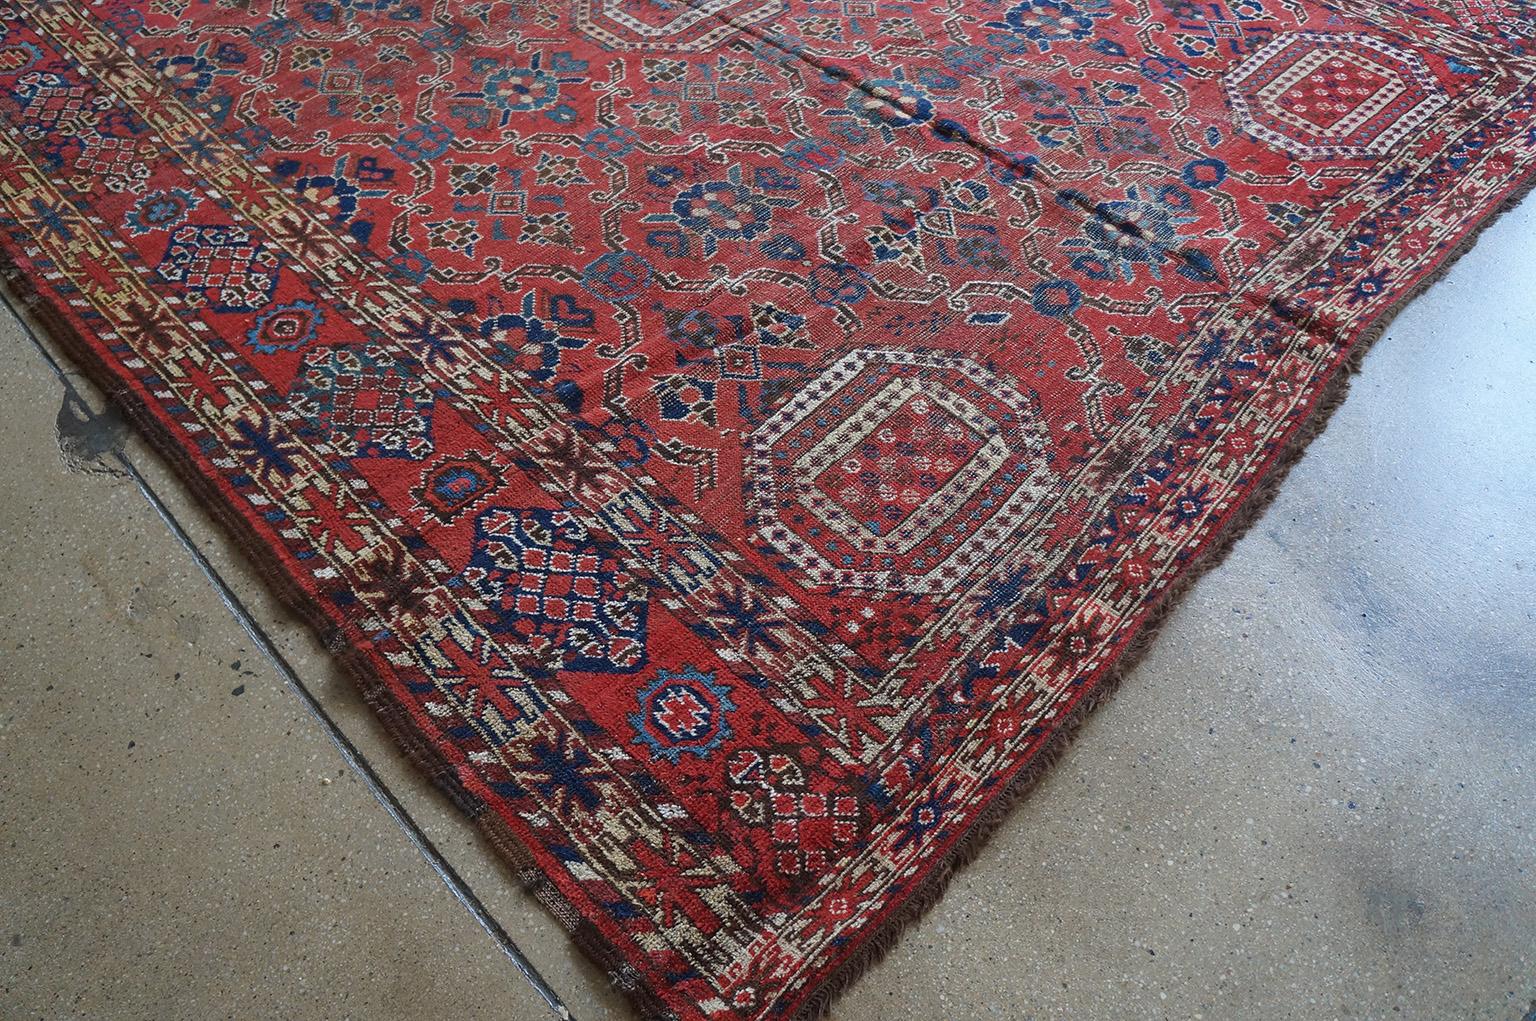 Mid-19th Century Central Asian Beshir Gallery Carpet 
6'7